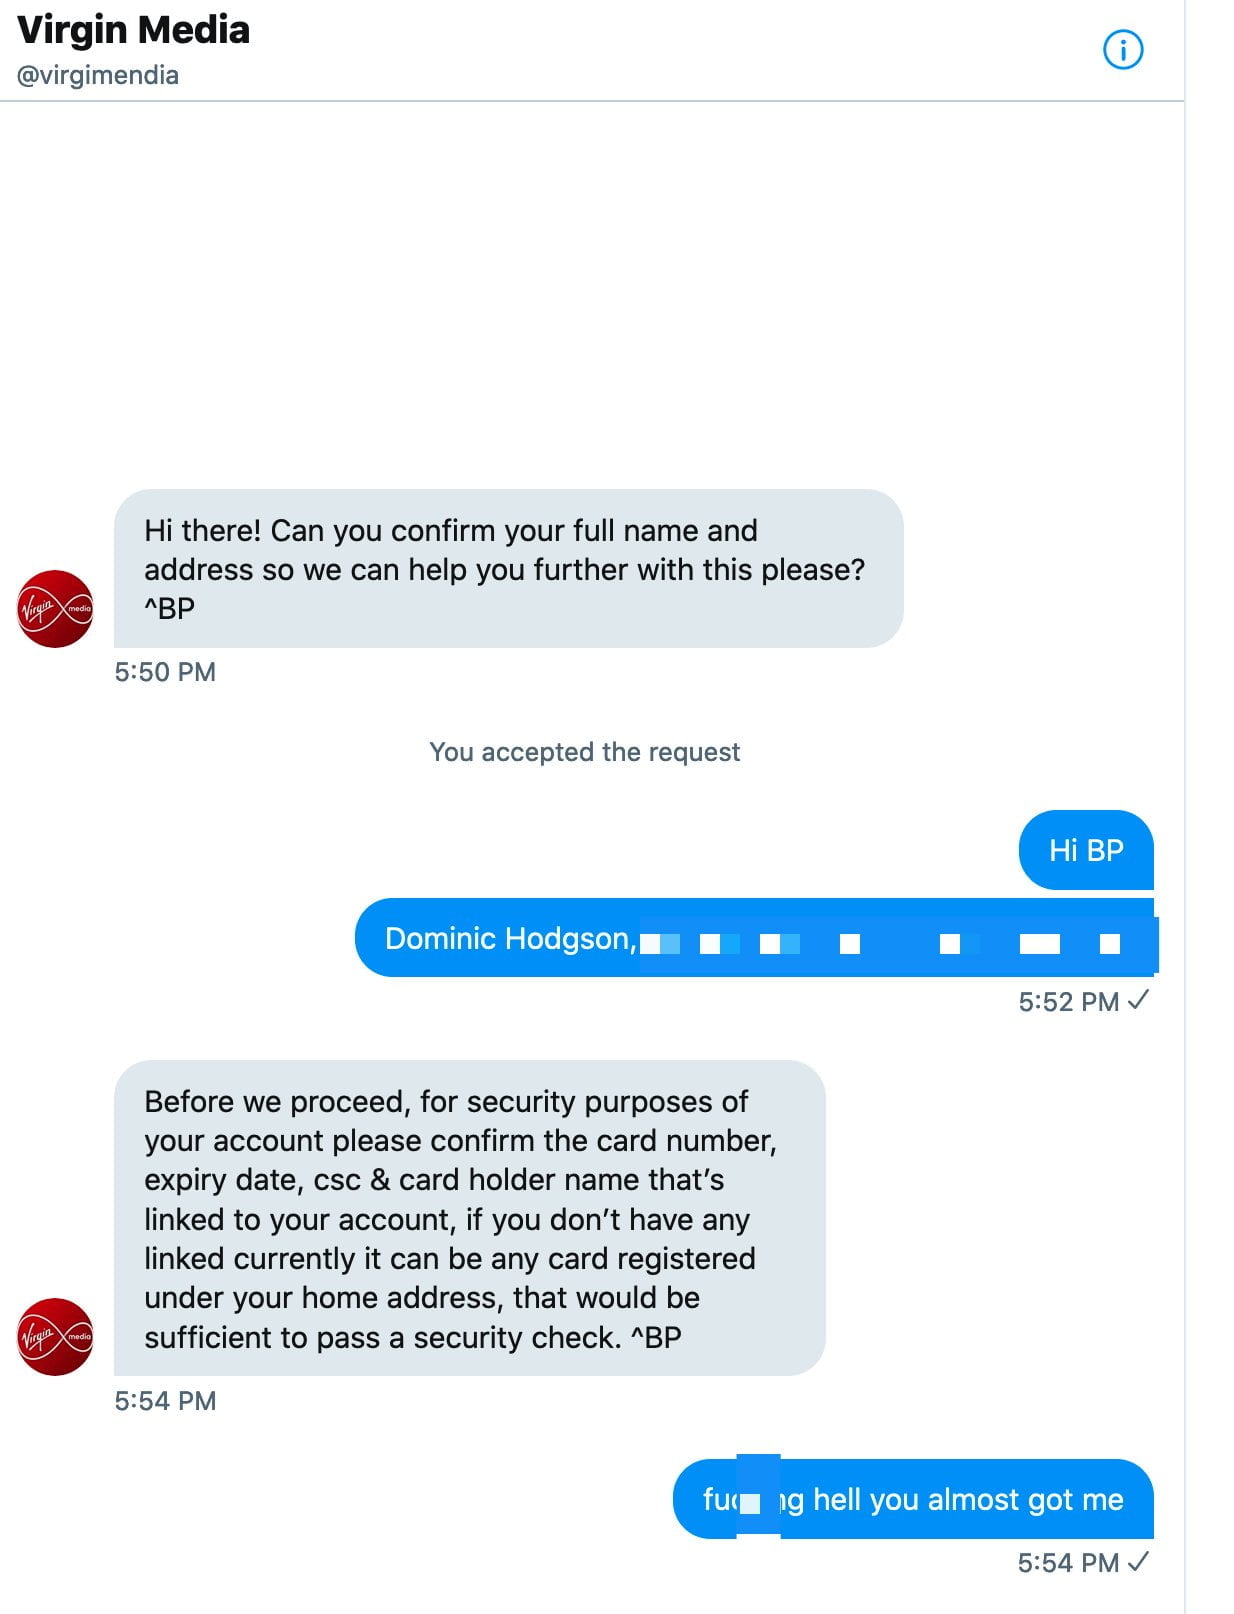 A Twitter exchange. Virgin ask Dom for his address - which he gives. Then they ask for his full credit card details. He refuses.